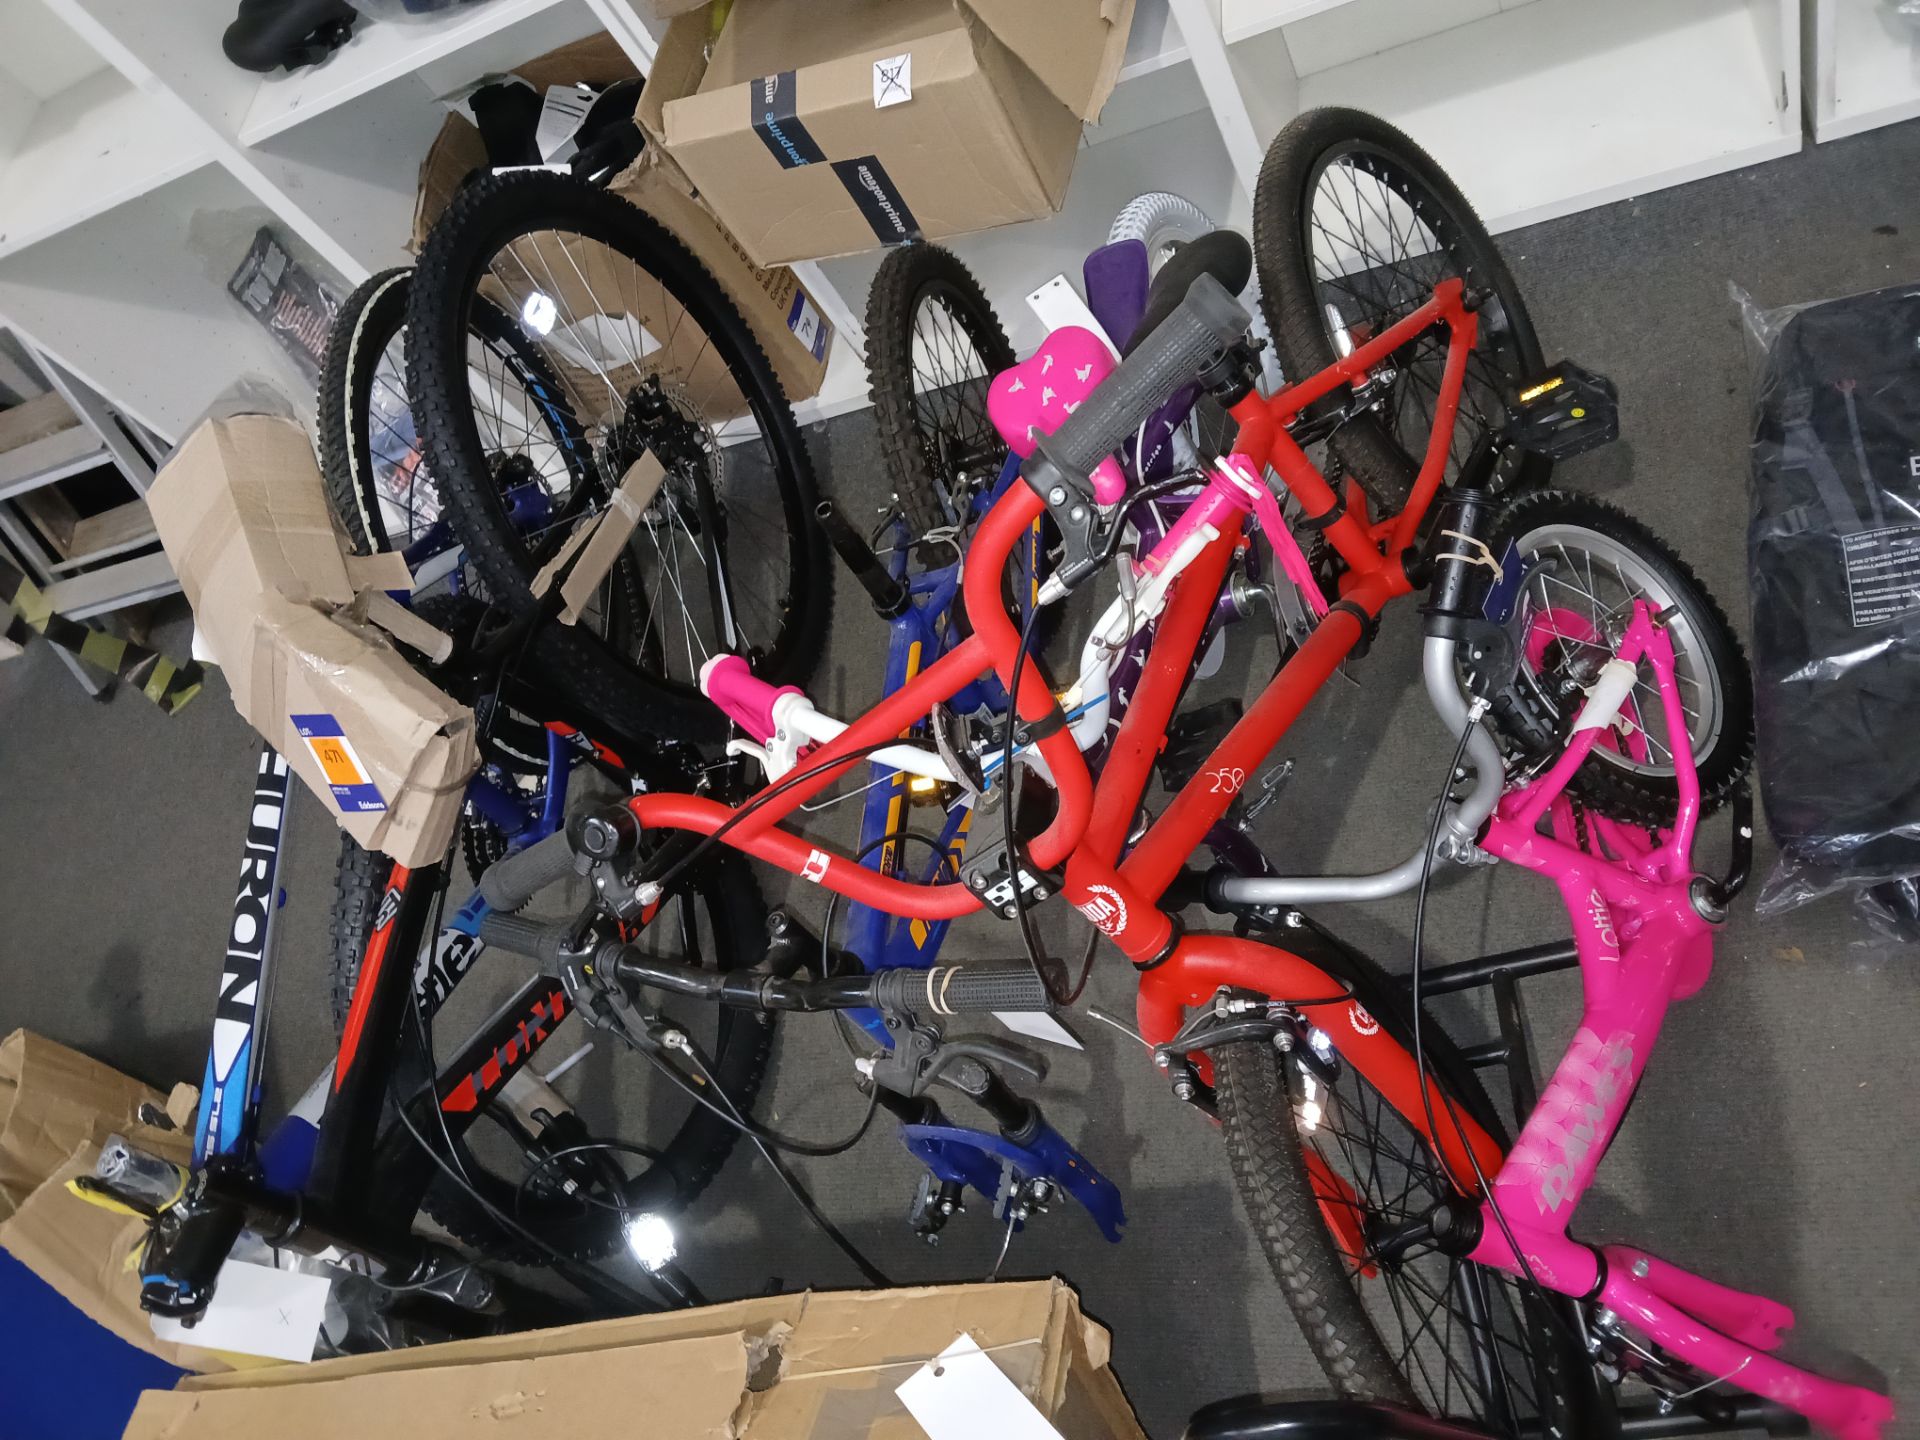 Large quantity of Cycling equipment / accessories, to include frames / part-built bicycles, racks, - Image 2 of 7